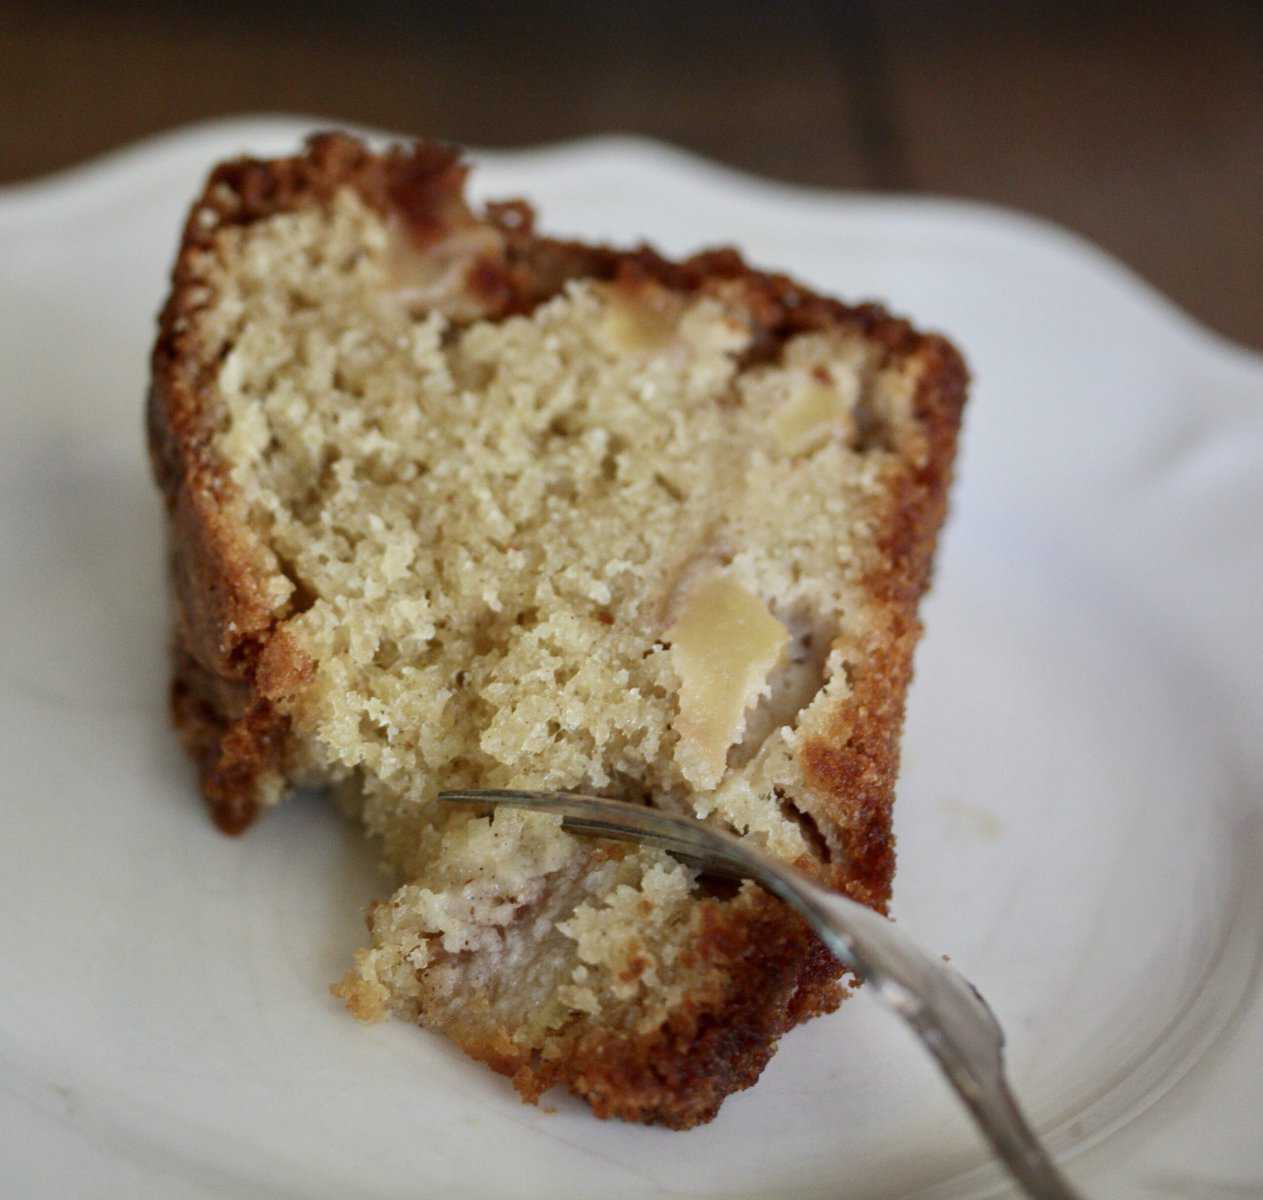 A fork cuts into a piece of pear cake.